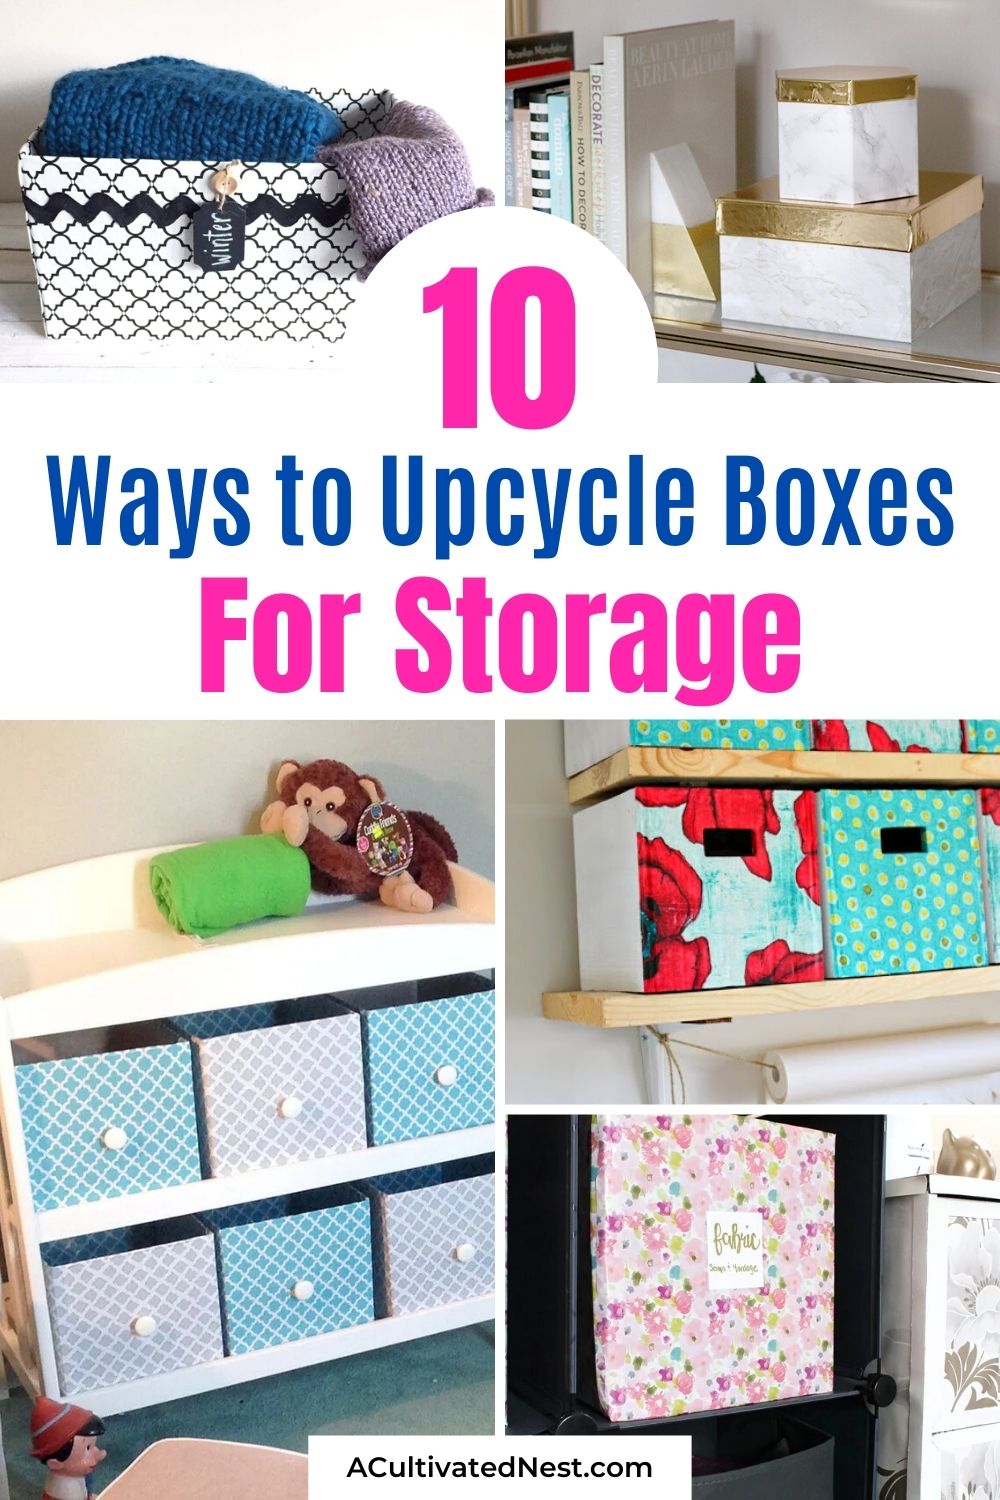 10 Clever Ways to Upcycle Boxes for Storage